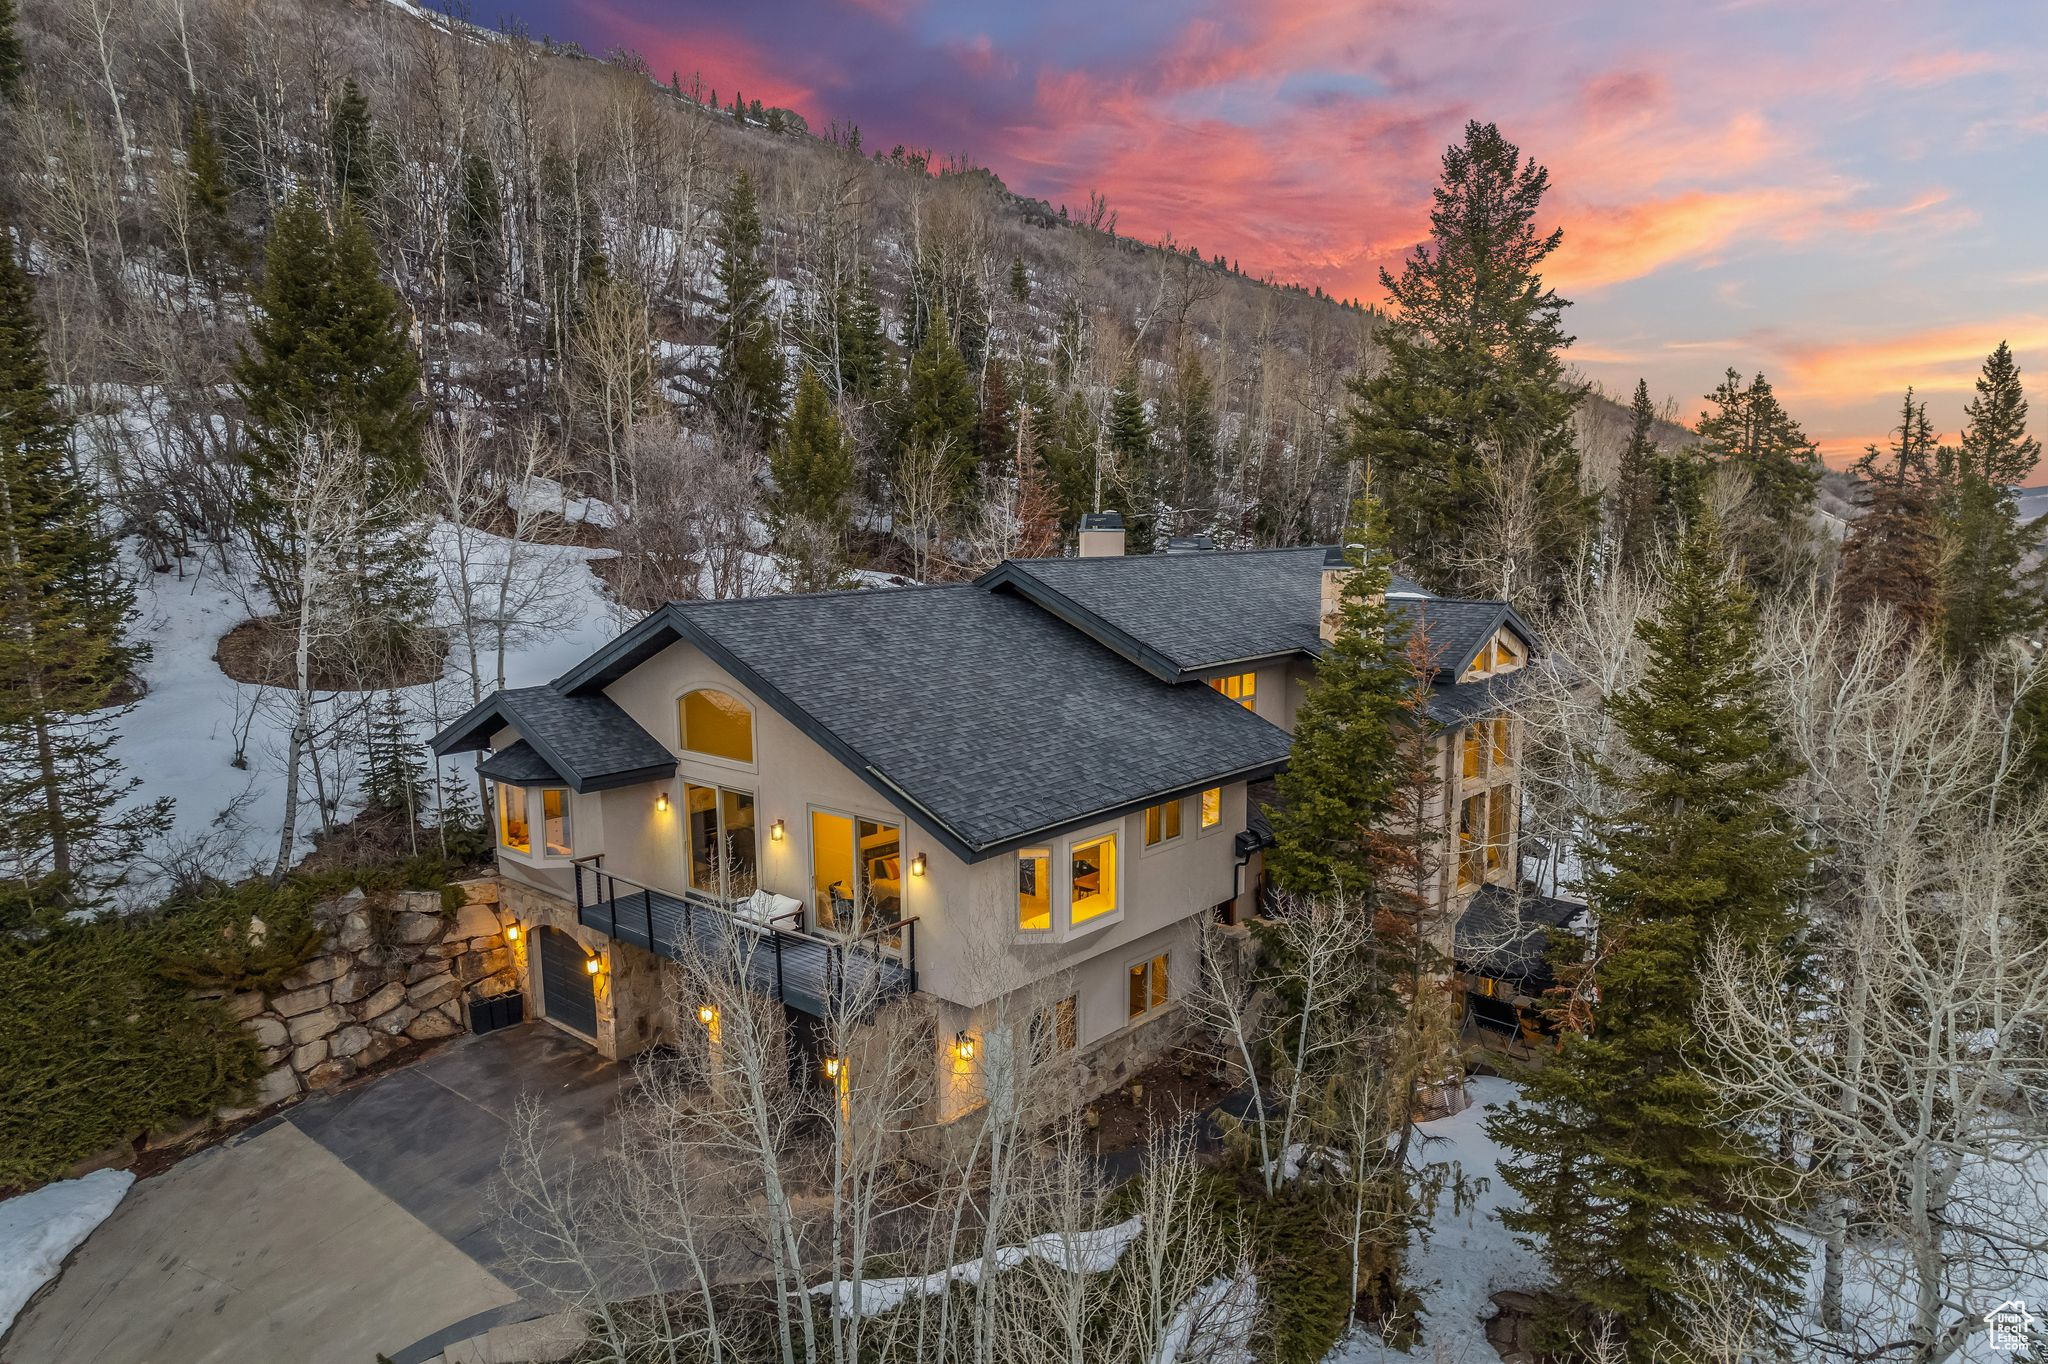 6880 CANYON DRIVE, Park City, Utah 84098, 5 Bedrooms Bedrooms, 22 Rooms Rooms,2 BathroomsBathrooms,Residential,For sale,CANYON DRIVE,1992282